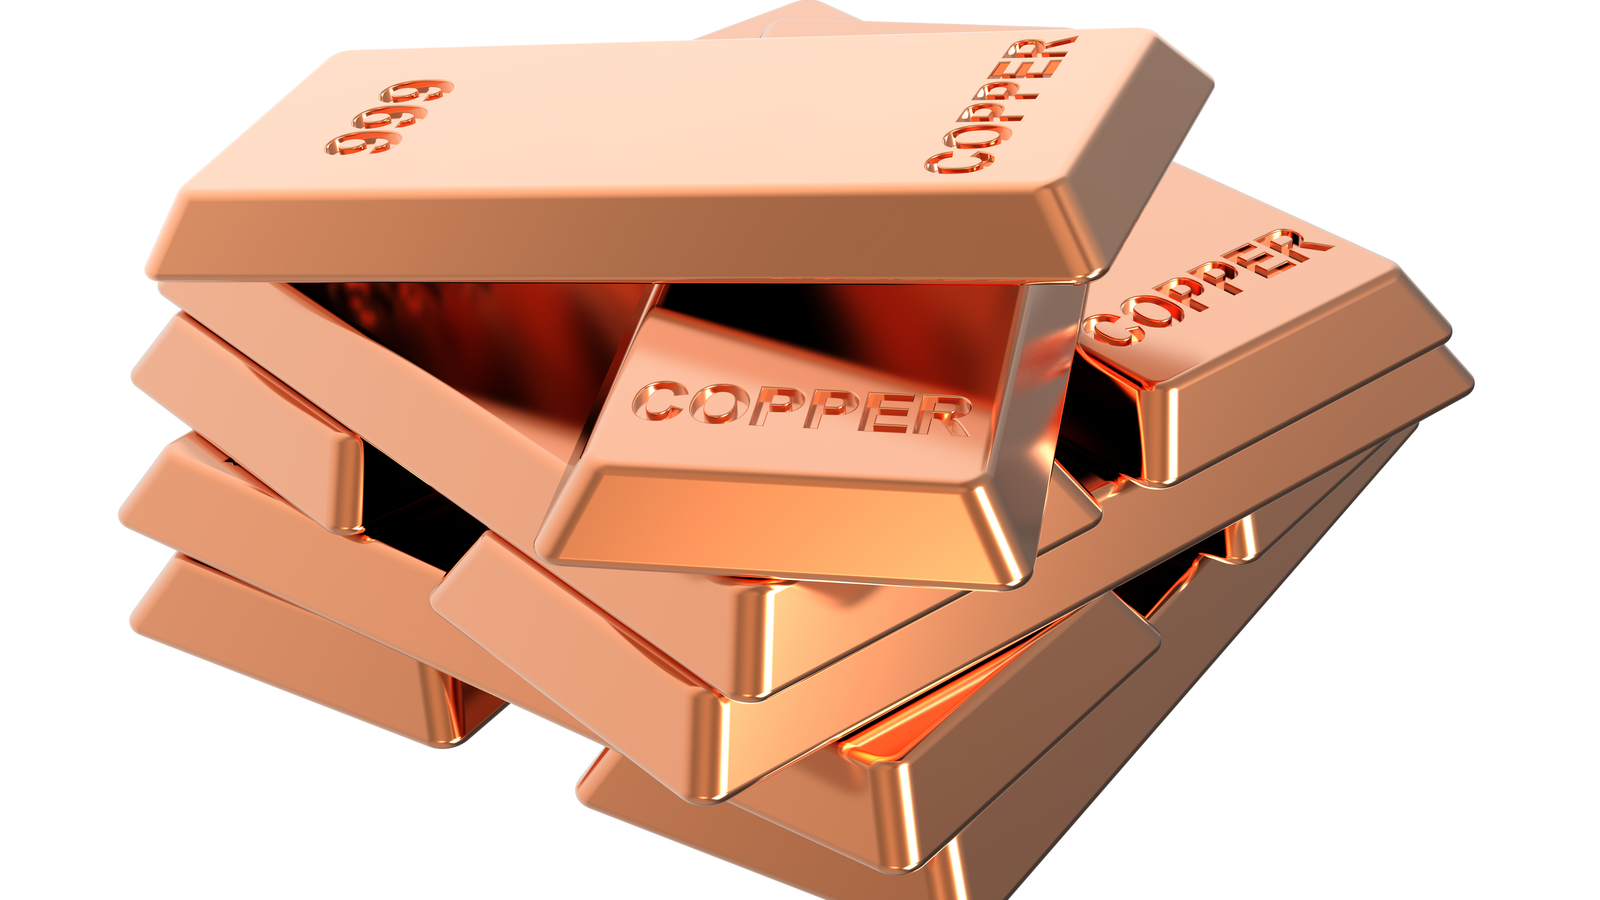 Copper ingots in a stack on a white background. Copper stocks.